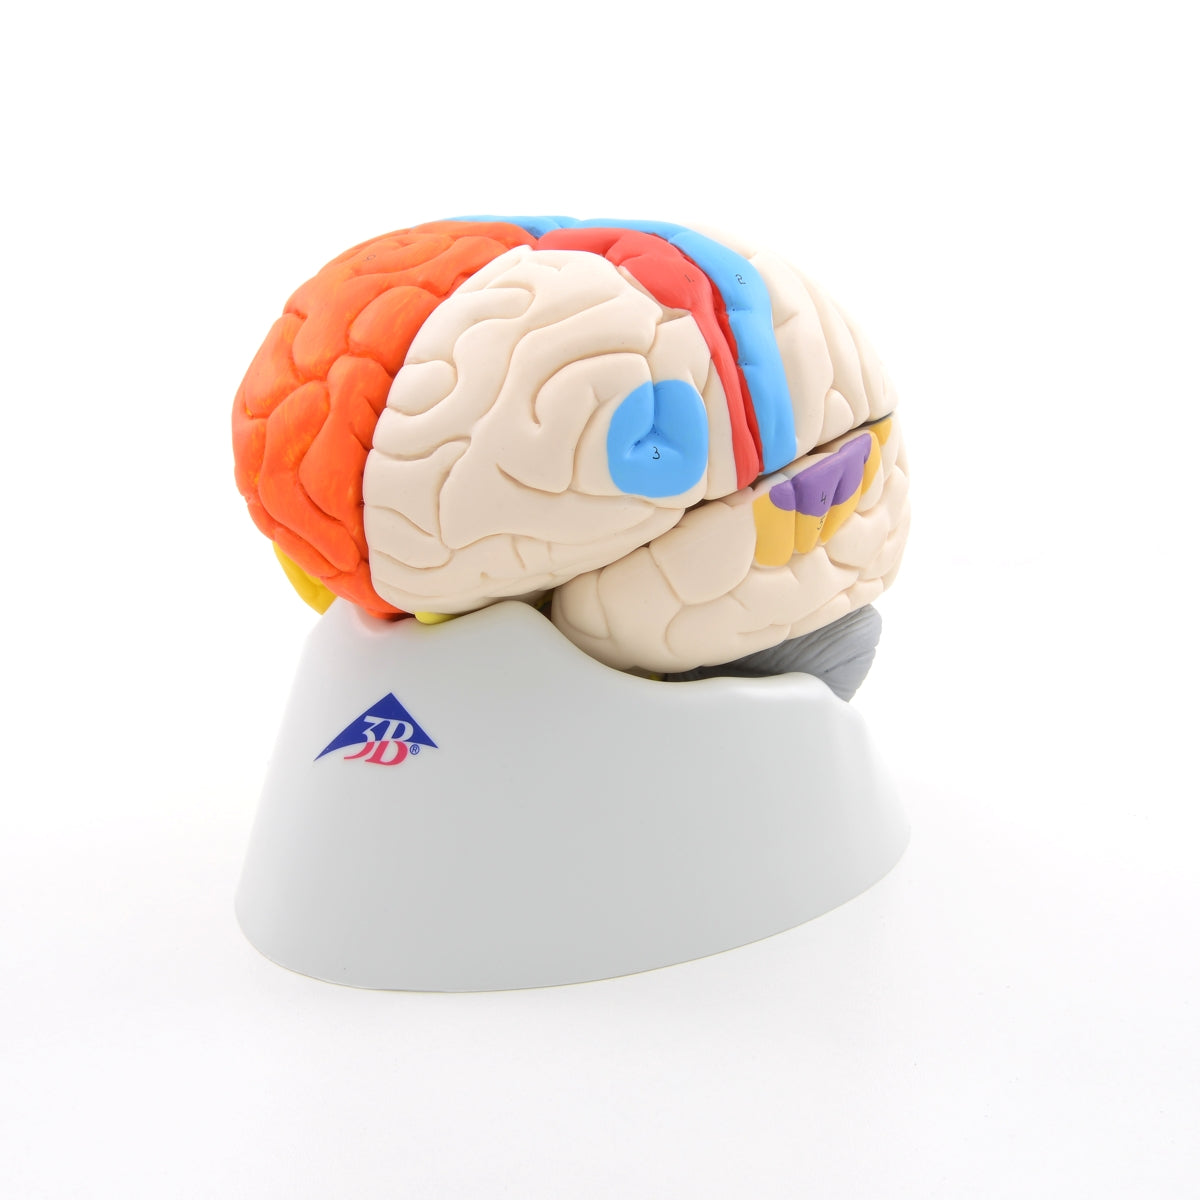 Brain model with the most important areas in educational colors. Can be separated into 8 parts